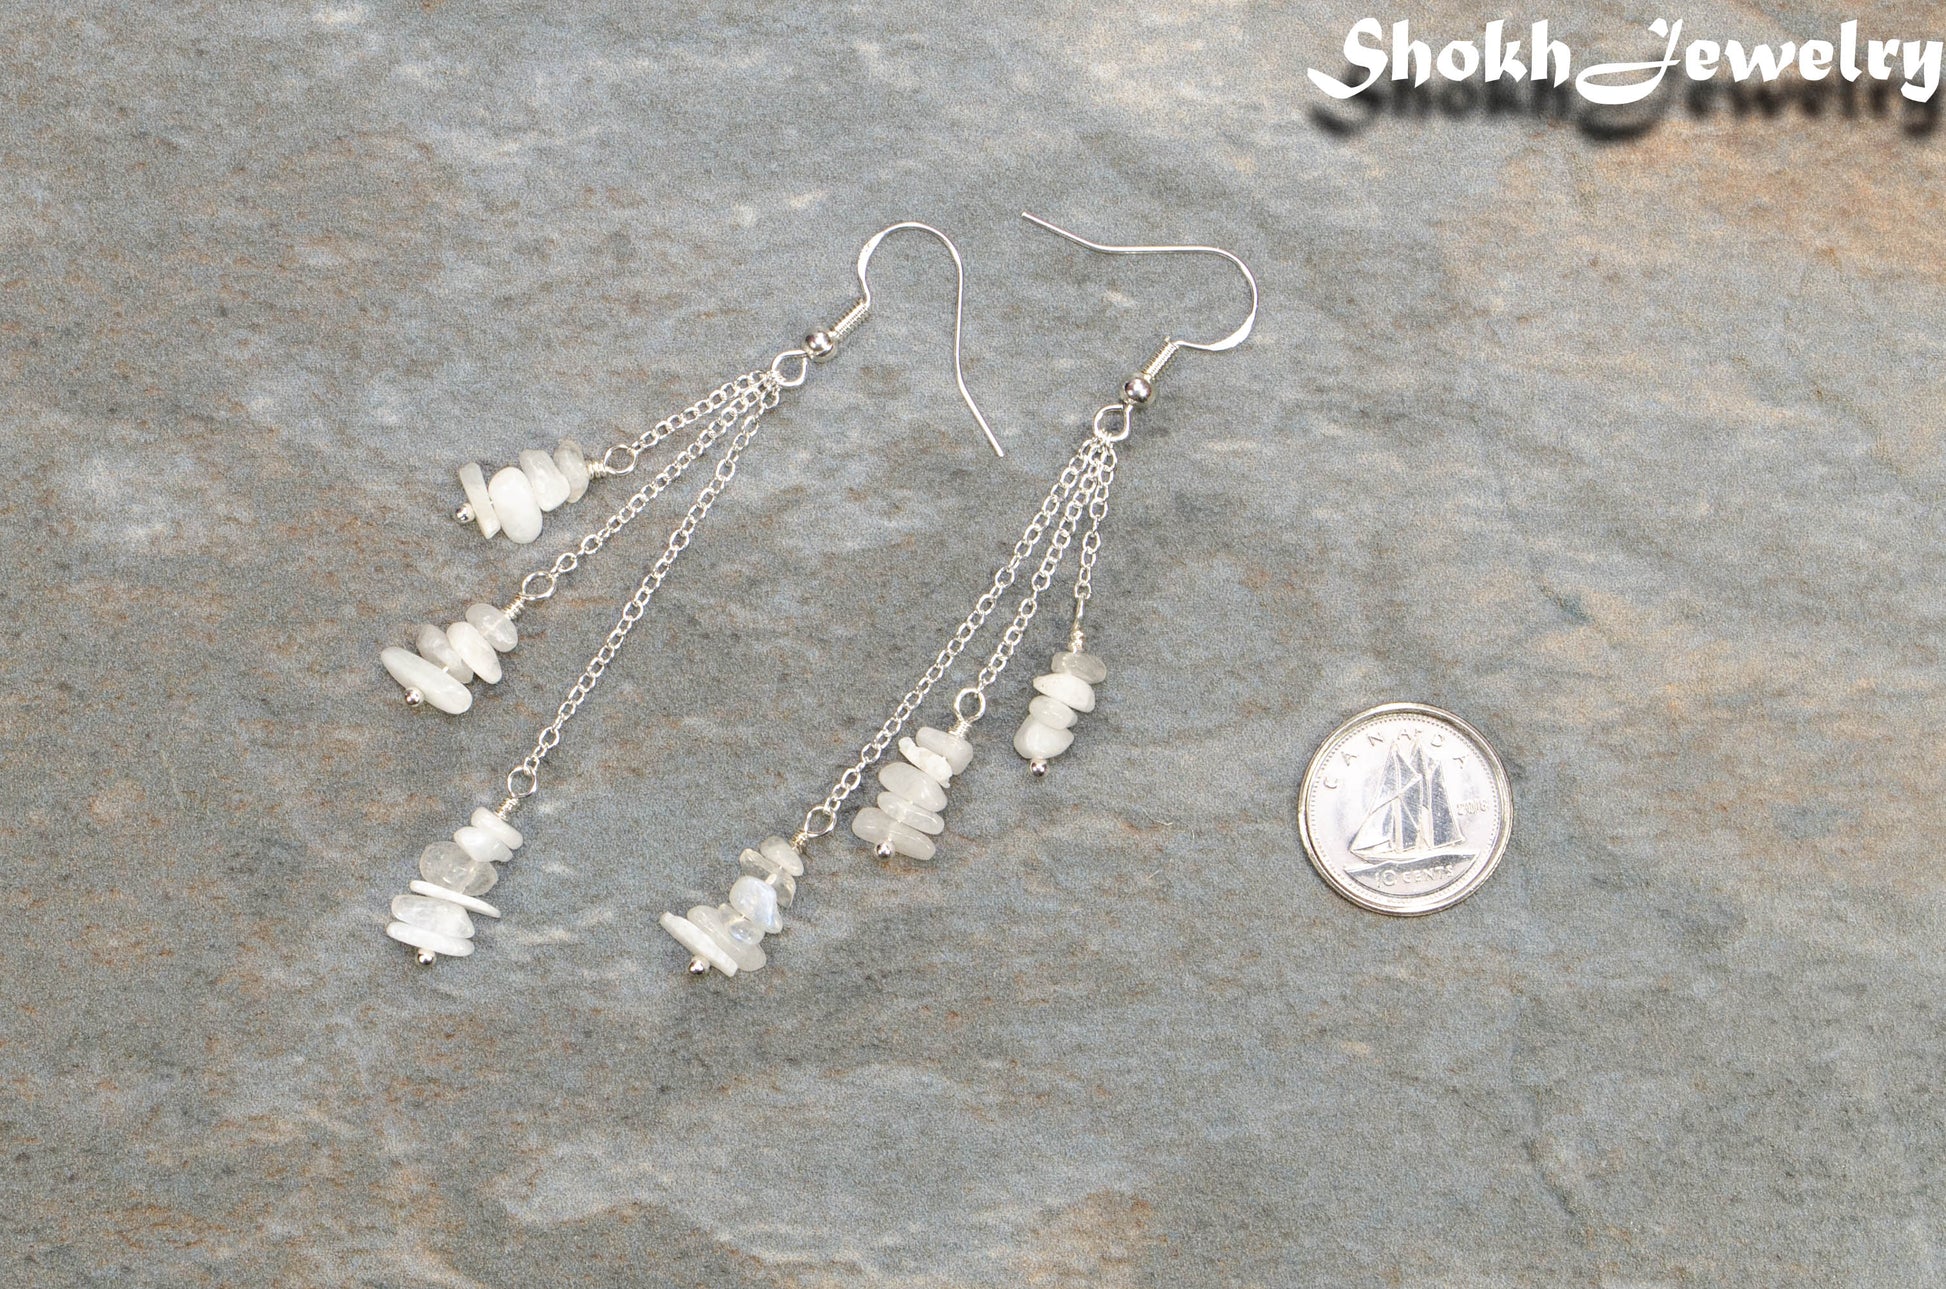 Long Silver Plated Chain and Moonstone Chip Earrings beside a dime